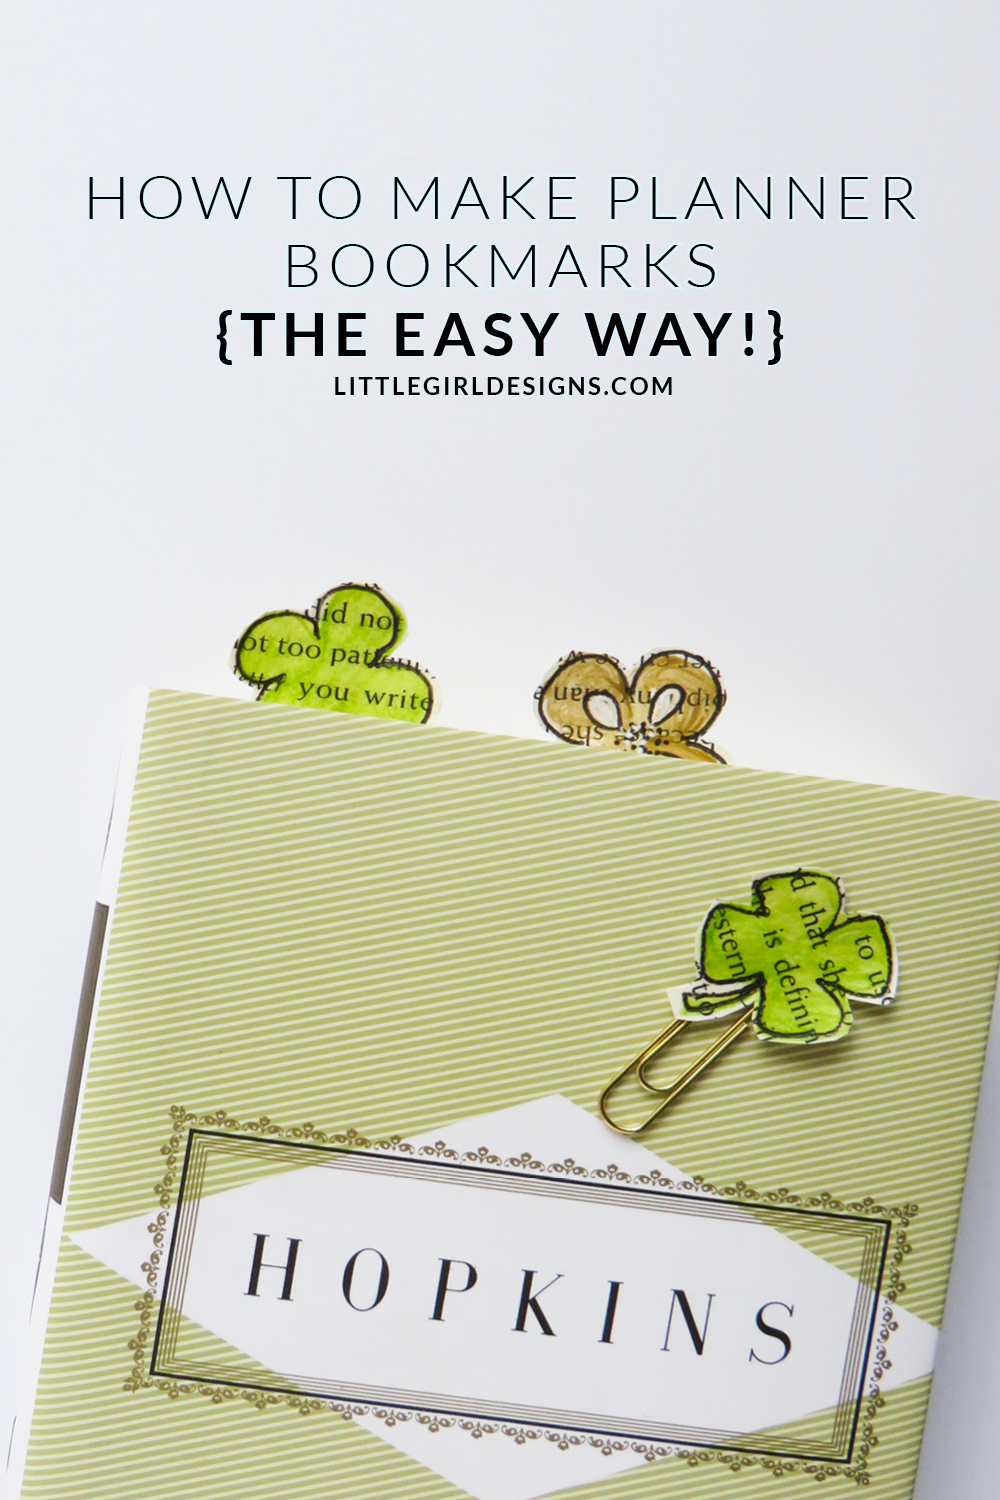 How to Make Planner Bookmarks (The Easy Way!)